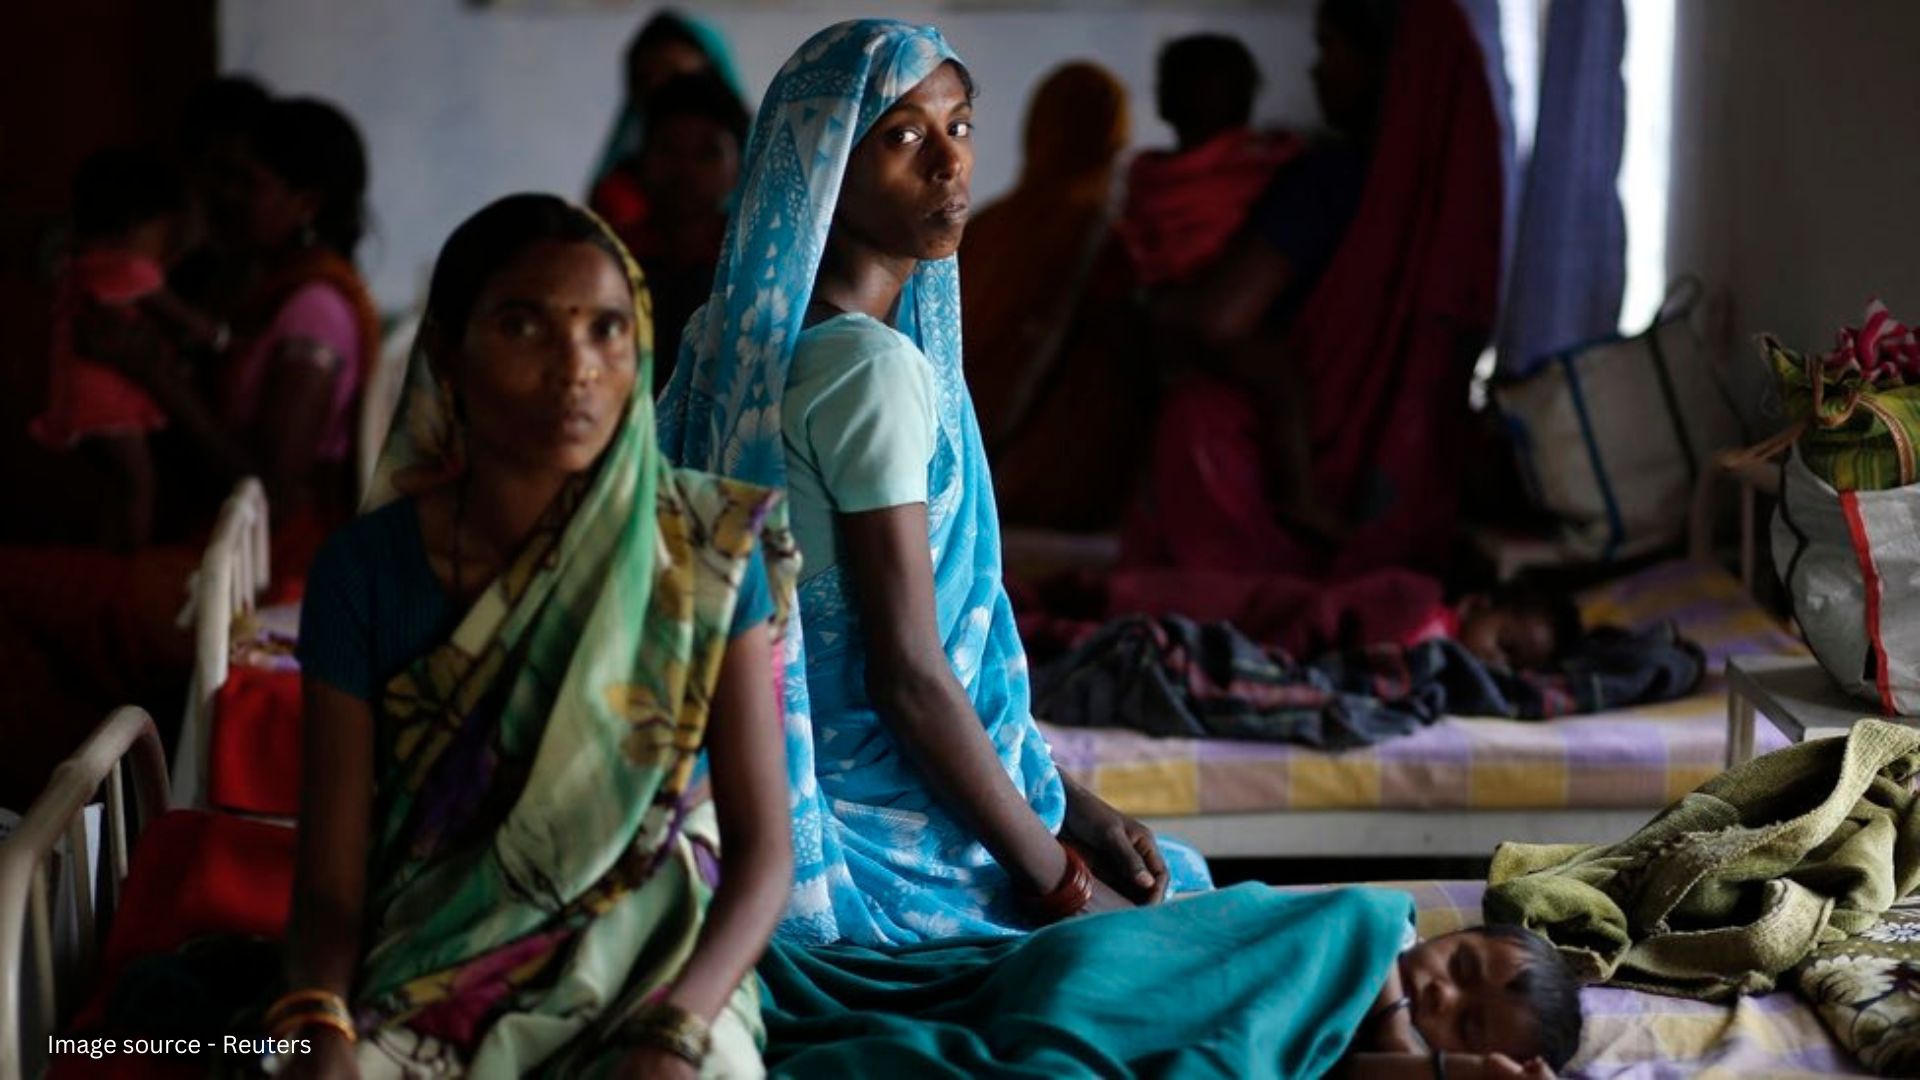 Bridging the healthcare divide: How technology is bringing a ray of hope in rural India